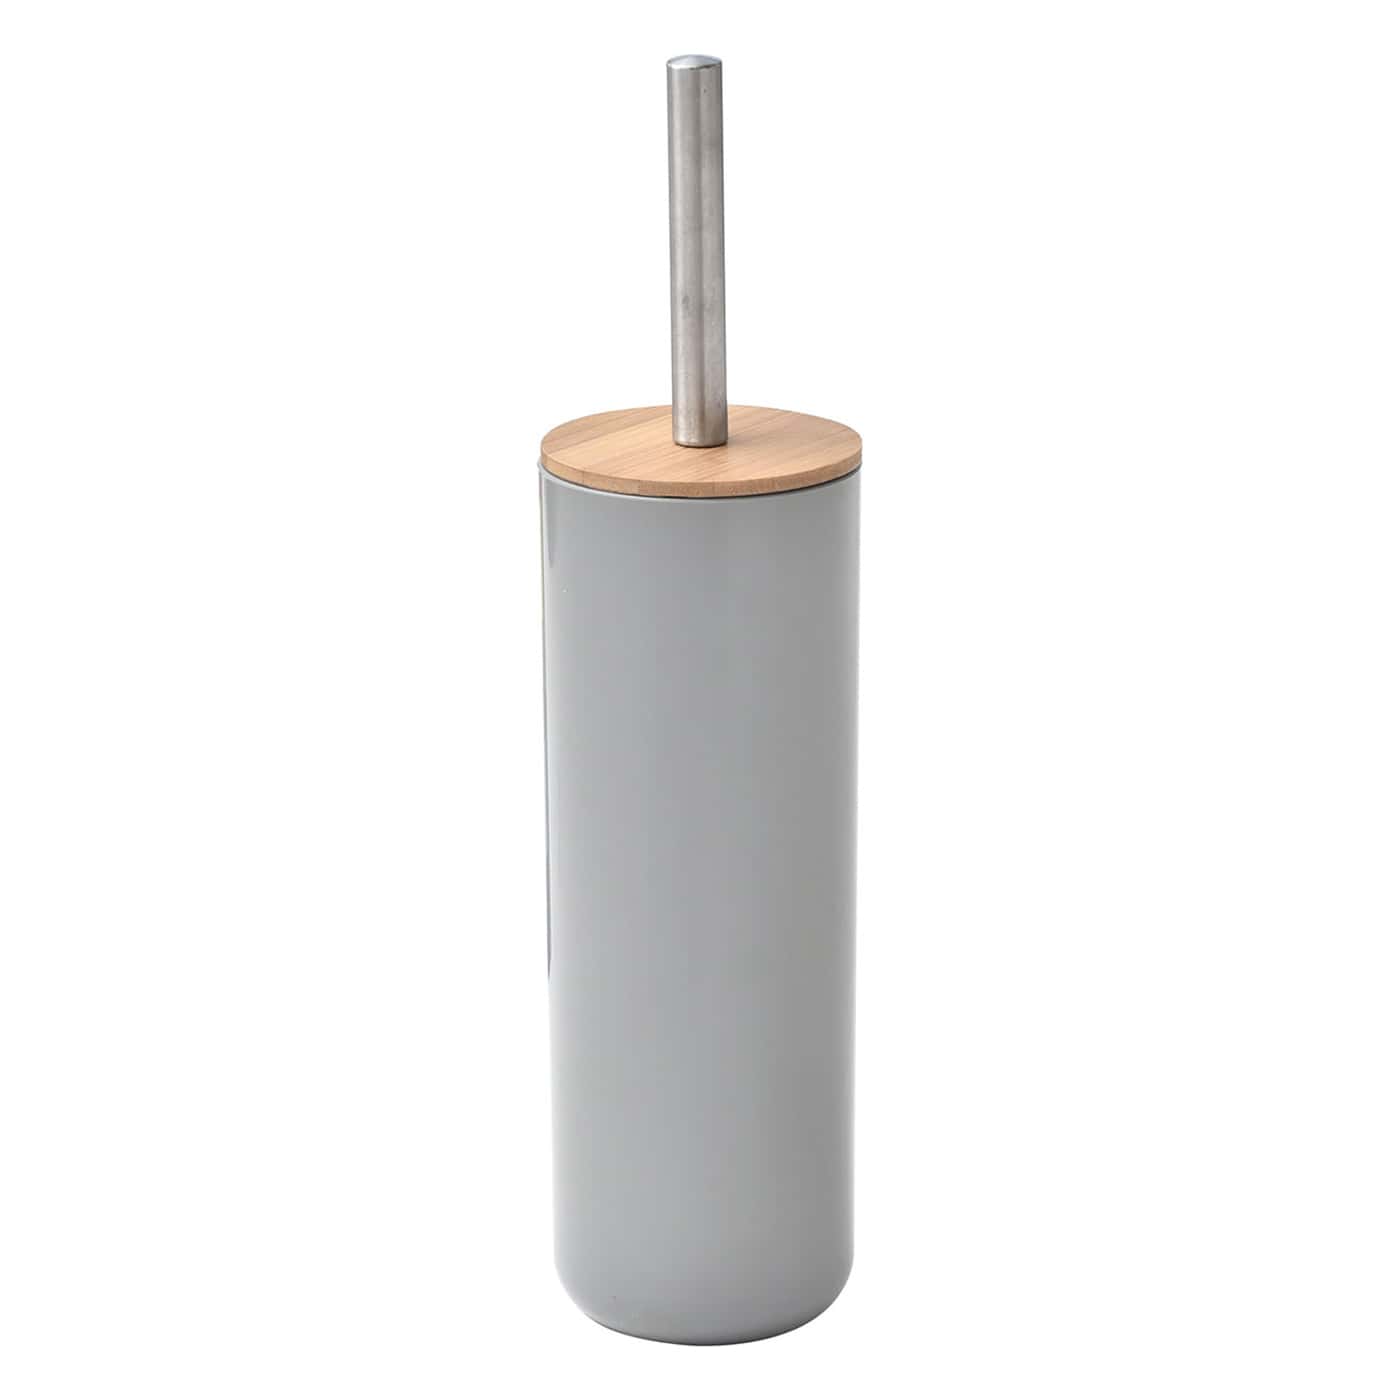 gray and bamboo toilet brush and holder set